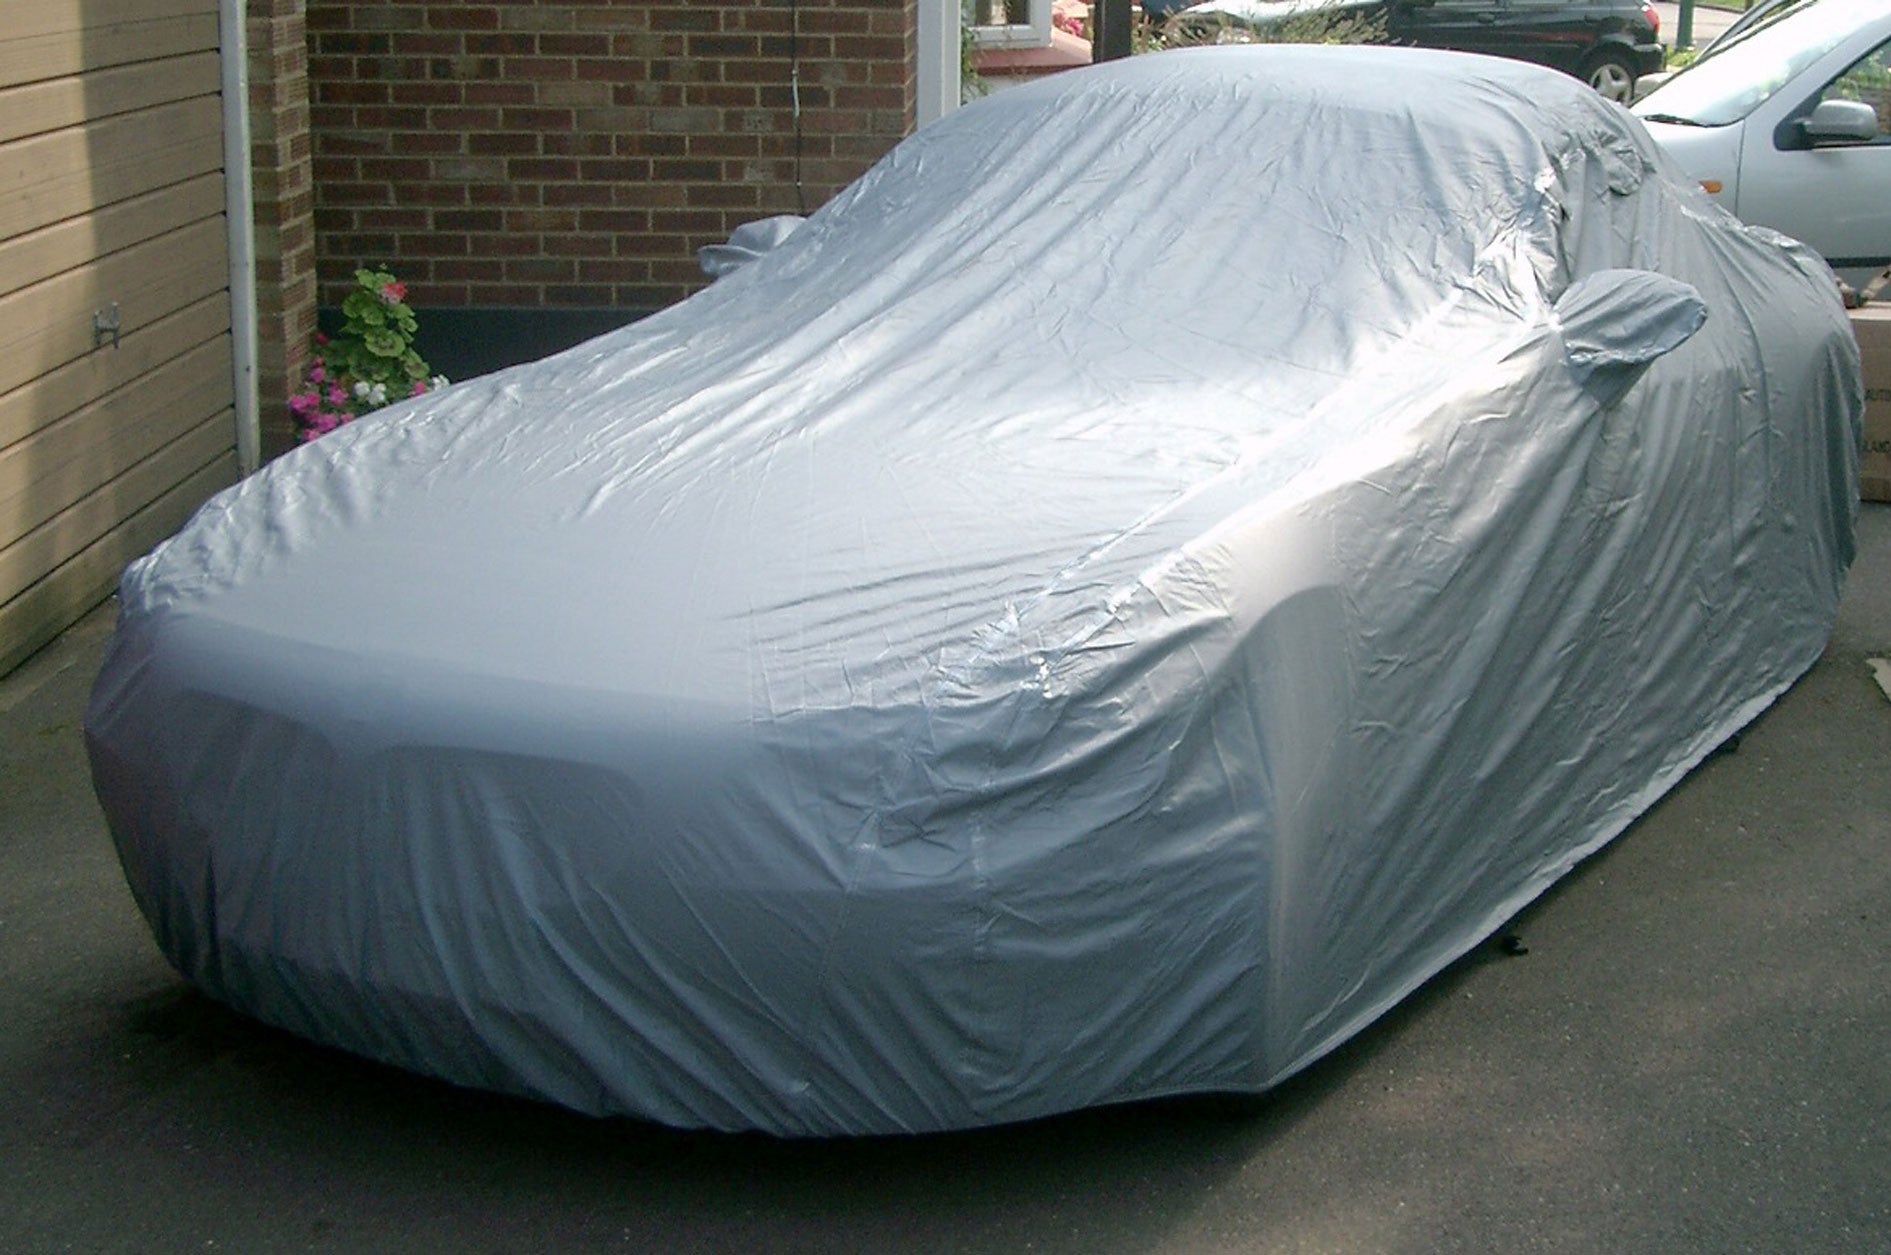 Monsoon outdoor waterproof winter car covers for VOLVO - Storm Car Covers